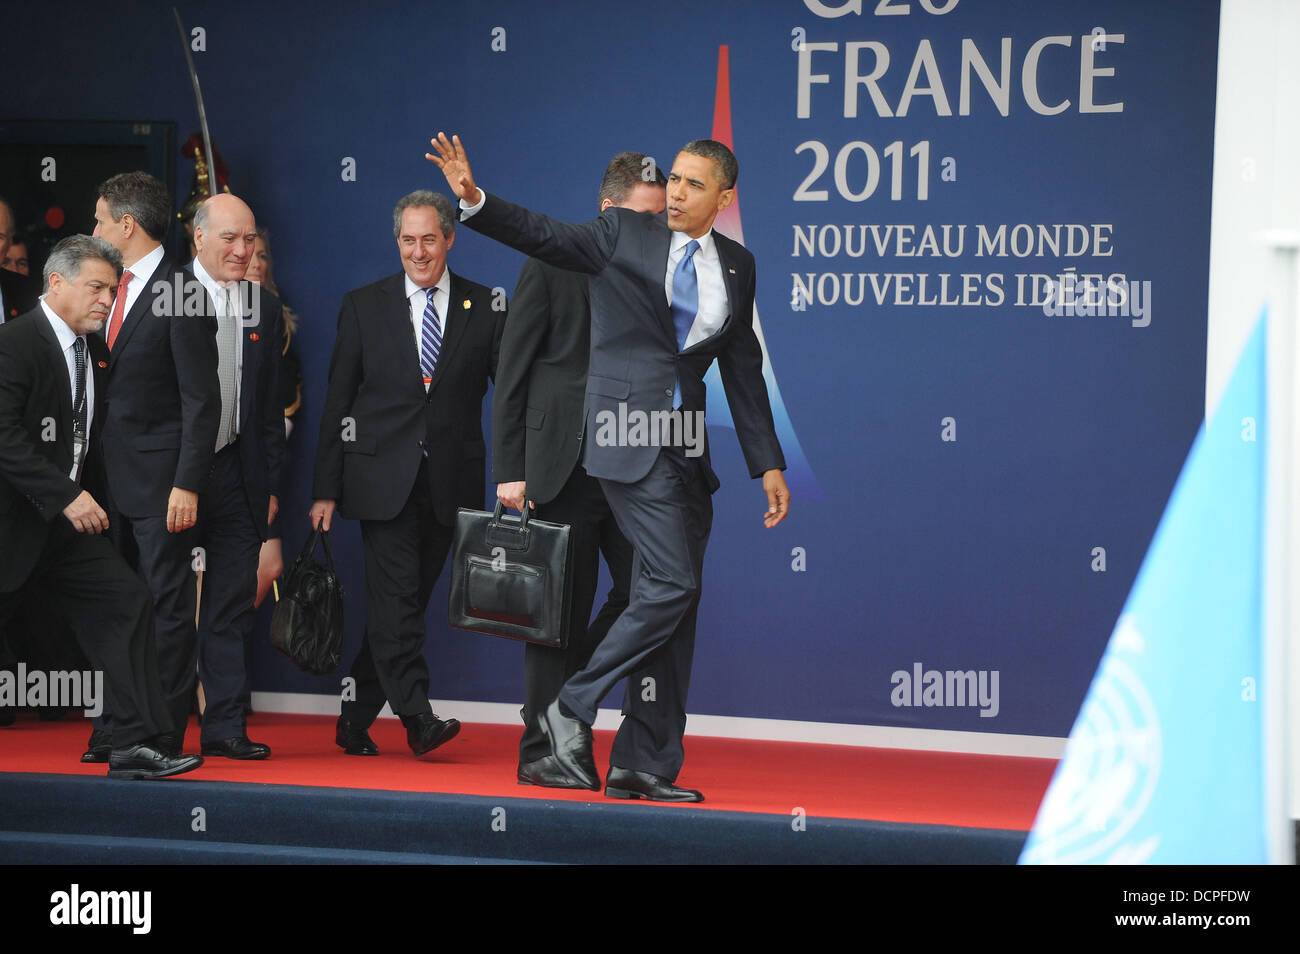 US President Barack Obama      World leaders in Cannes for the G20 Summit  Cannes, France - 03.11.11 Stock Photo